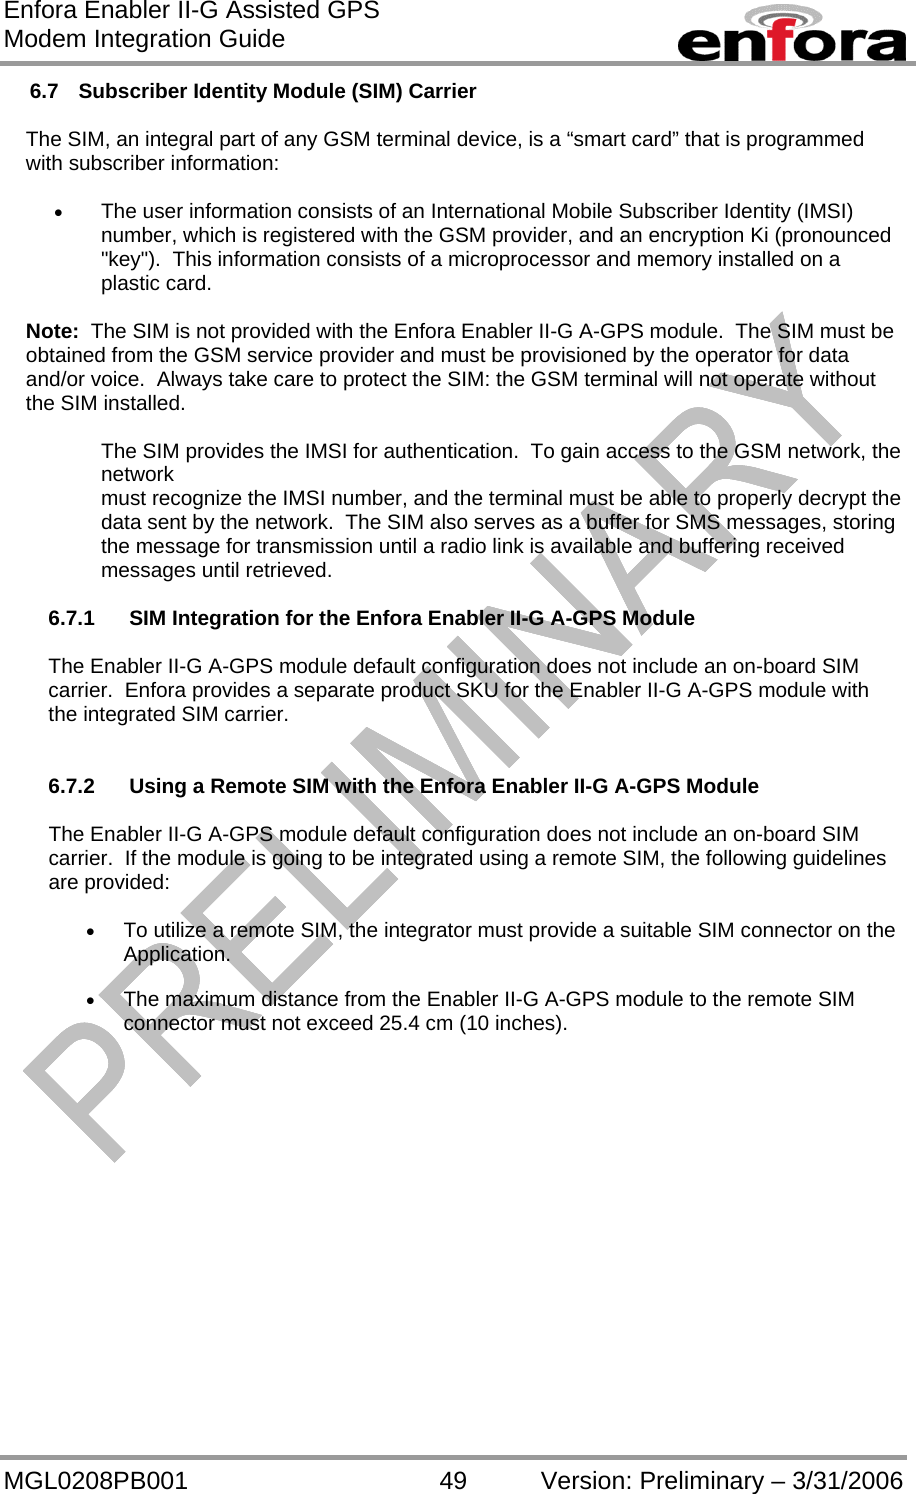 Enfora Enabler II-G Assisted GPS Modem Integration Guide MGL0208PB001 49 Version: Preliminary – 3/31/2006 6.7  Subscriber Identity Module (SIM) Carrier  The SIM, an integral part of any GSM terminal device, is a “smart card” that is programmed with subscriber information:  •  The user information consists of an International Mobile Subscriber Identity (IMSI) number, which is registered with the GSM provider, and an encryption Ki (pronounced &quot;key&quot;).  This information consists of a microprocessor and memory installed on a plastic card.  Note:  The SIM is not provided with the Enfora Enabler II-G A-GPS module.  The SIM must be obtained from the GSM service provider and must be provisioned by the operator for data and/or voice.  Always take care to protect the SIM: the GSM terminal will not operate without the SIM installed.  The SIM provides the IMSI for authentication.  To gain access to the GSM network, the network must recognize the IMSI number, and the terminal must be able to properly decrypt the data sent by the network.  The SIM also serves as a buffer for SMS messages, storing the message for transmission until a radio link is available and buffering received messages until retrieved.  6.7.1   SIM Integration for the Enfora Enabler II-G A-GPS Module  The Enabler II-G A-GPS module default configuration does not include an on-board SIM carrier.  Enfora provides a separate product SKU for the Enabler II-G A-GPS module with the integrated SIM carrier.   6.7.2   Using a Remote SIM with the Enfora Enabler II-G A-GPS Module  The Enabler II-G A-GPS module default configuration does not include an on-board SIM carrier.  If the module is going to be integrated using a remote SIM, the following guidelines are provided:  •  To utilize a remote SIM, the integrator must provide a suitable SIM connector on the Application.  •  The maximum distance from the Enabler II-G A-GPS module to the remote SIM connector must not exceed 25.4 cm (10 inches). 